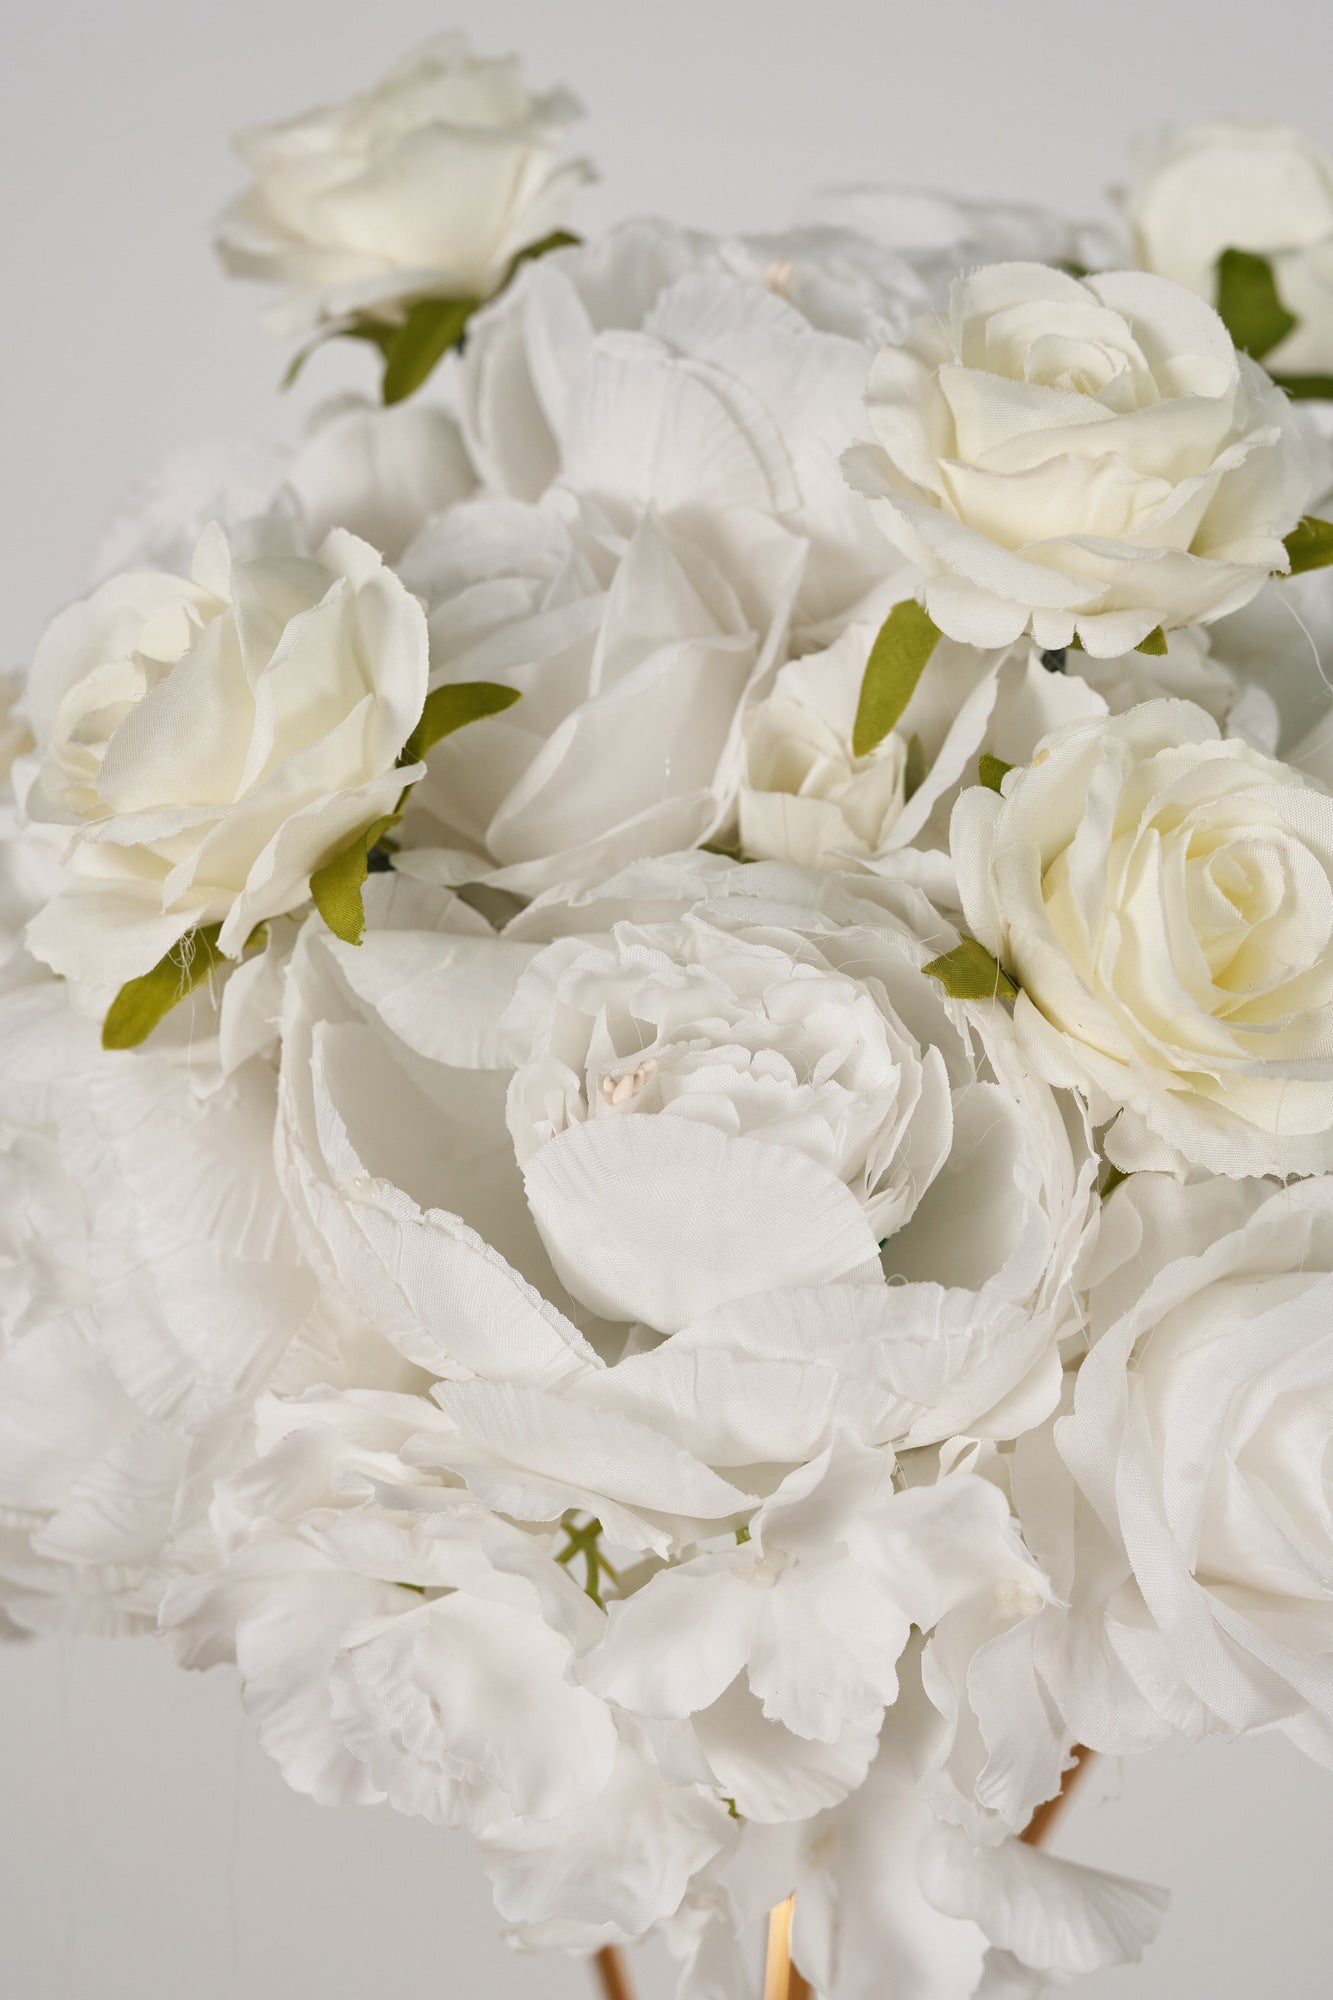 Flower Ball Pure White Wedding Proposal Party Centerpieces Decor